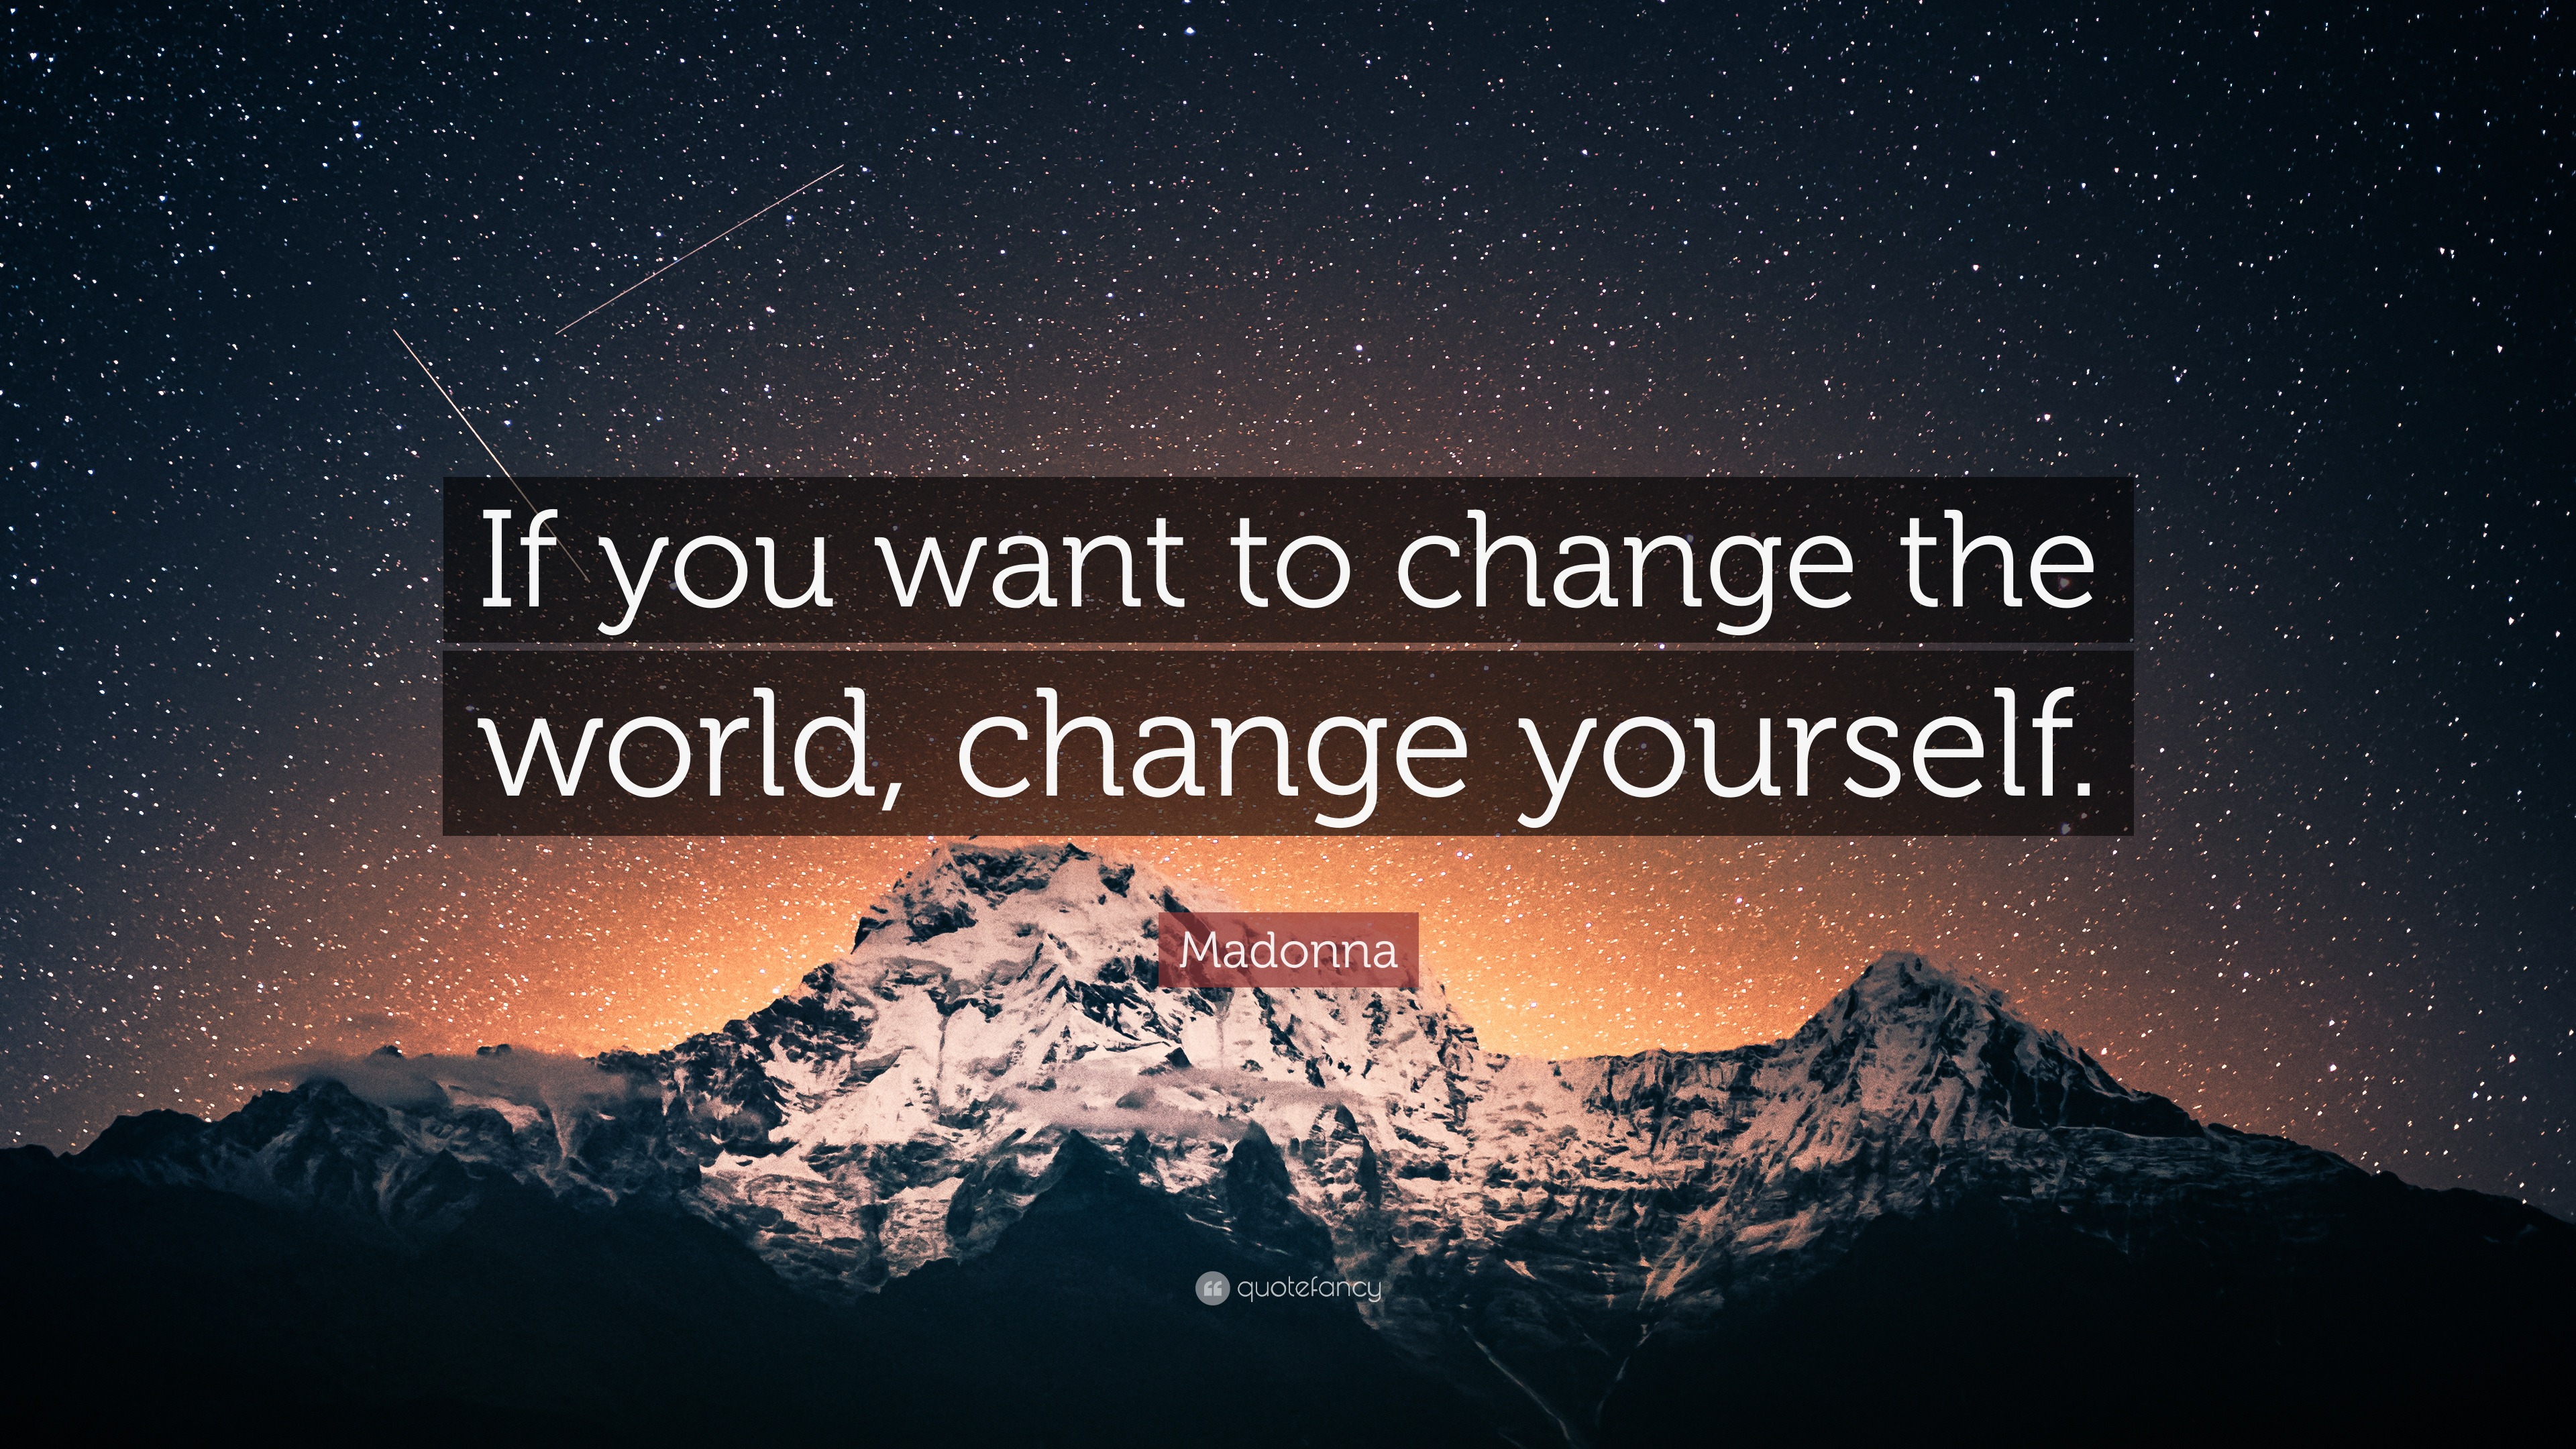 Madonna Quote: “If you want to change the world, change yourself.”